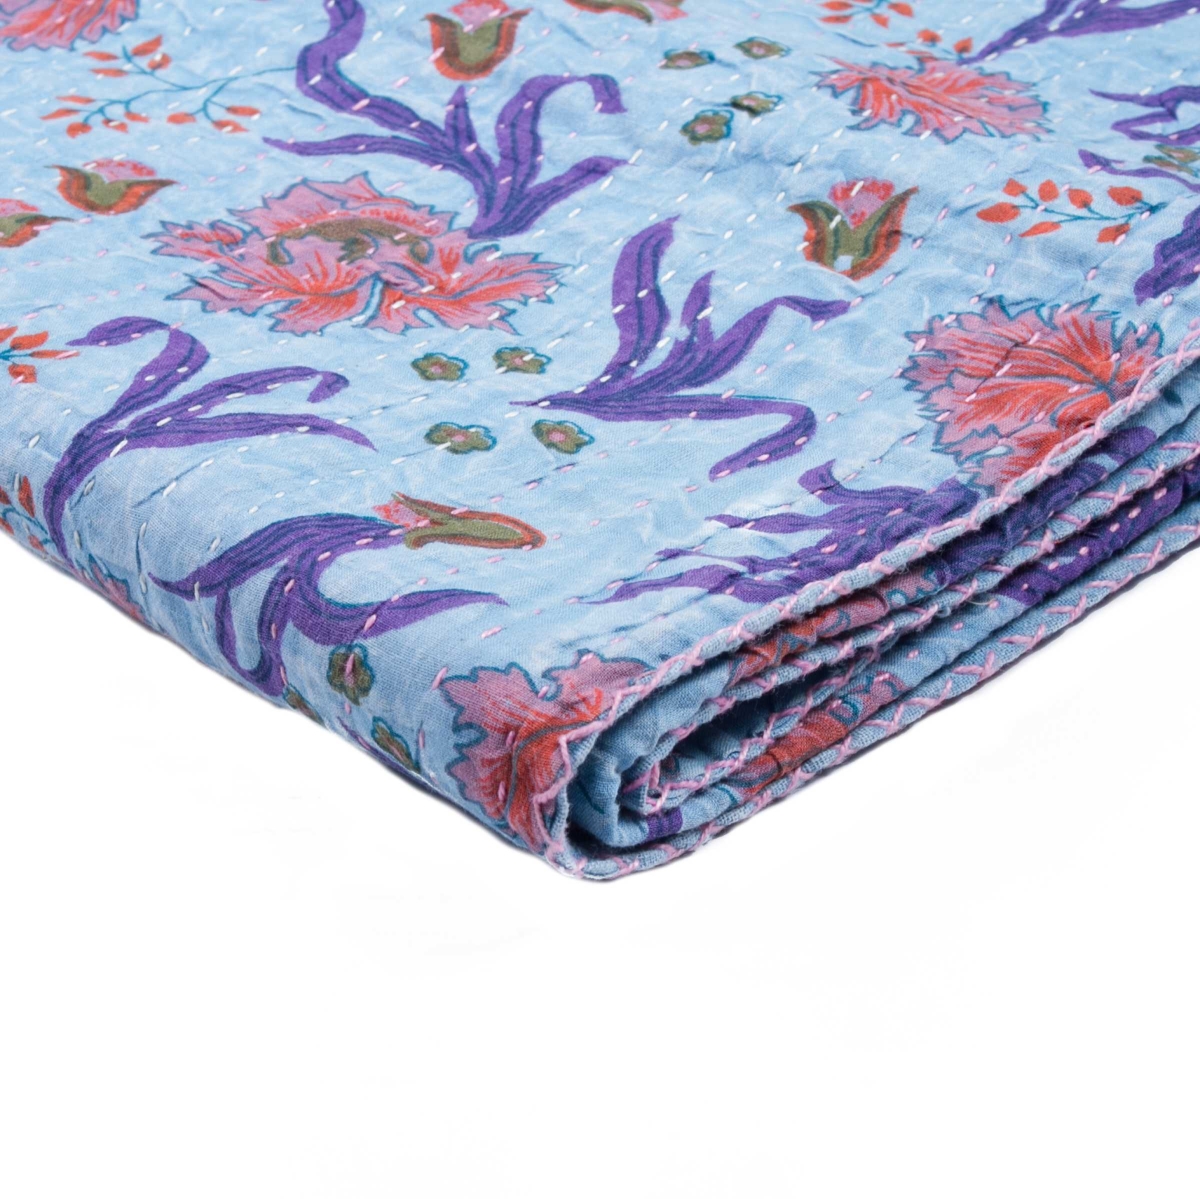 Home Roots Beddings 332342 Kantha Cotton Throw - 1117-no.21, Multicolor - 50 X 70 In.